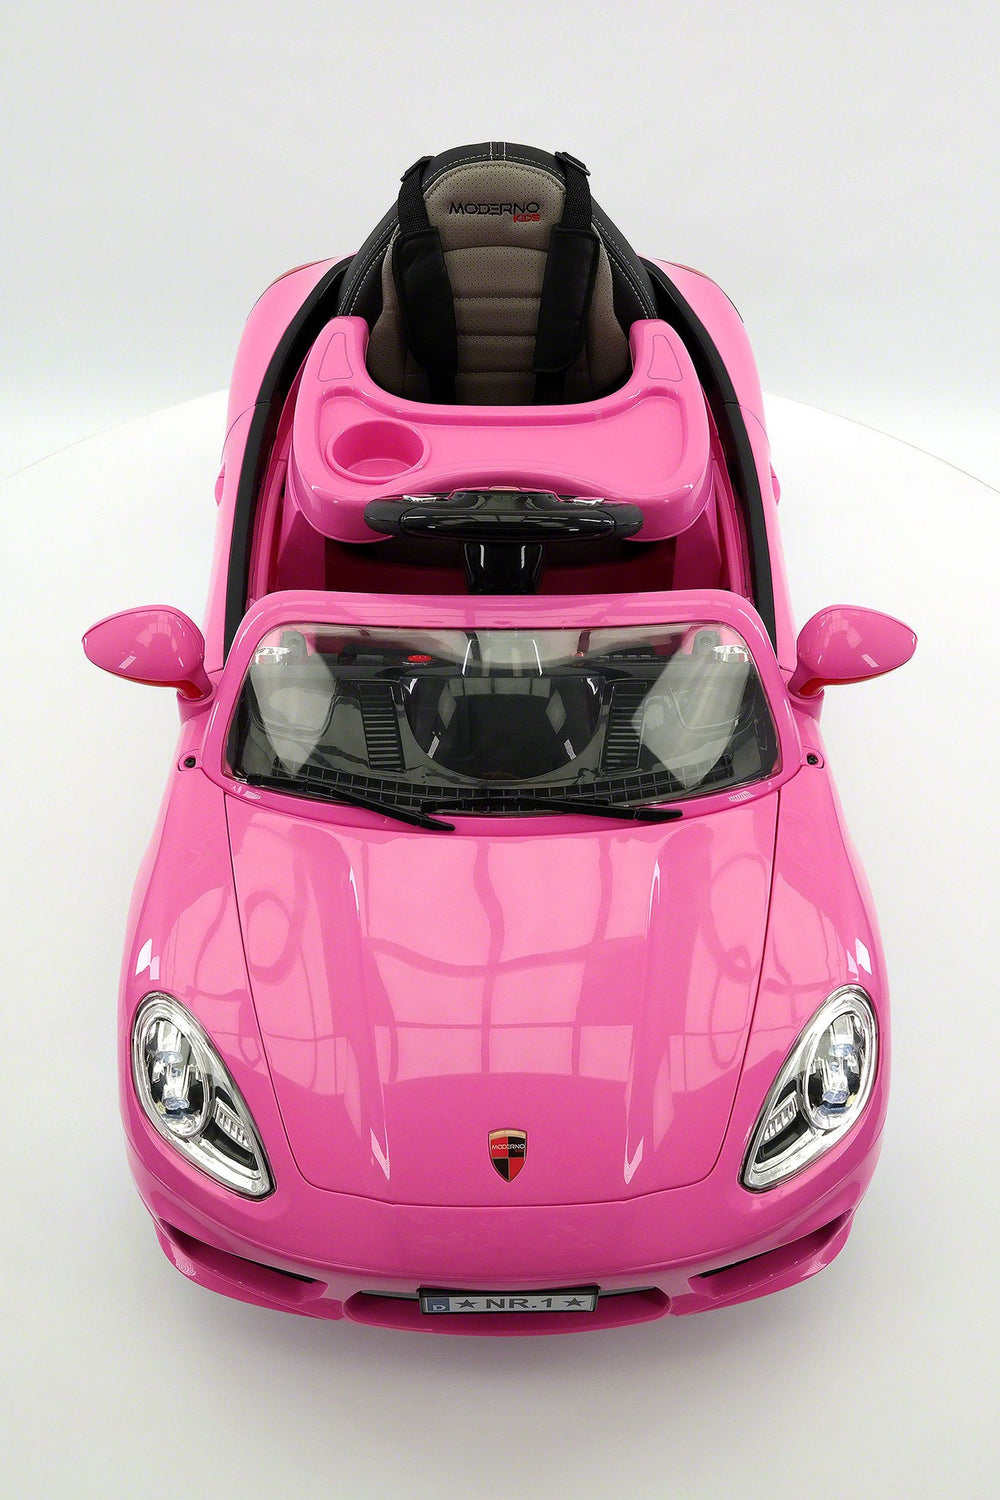 2021 PORCHE BOKSTER 12V BATTERY OPERATED KIDS ELECTRIC RIDE-ON CAR PINK